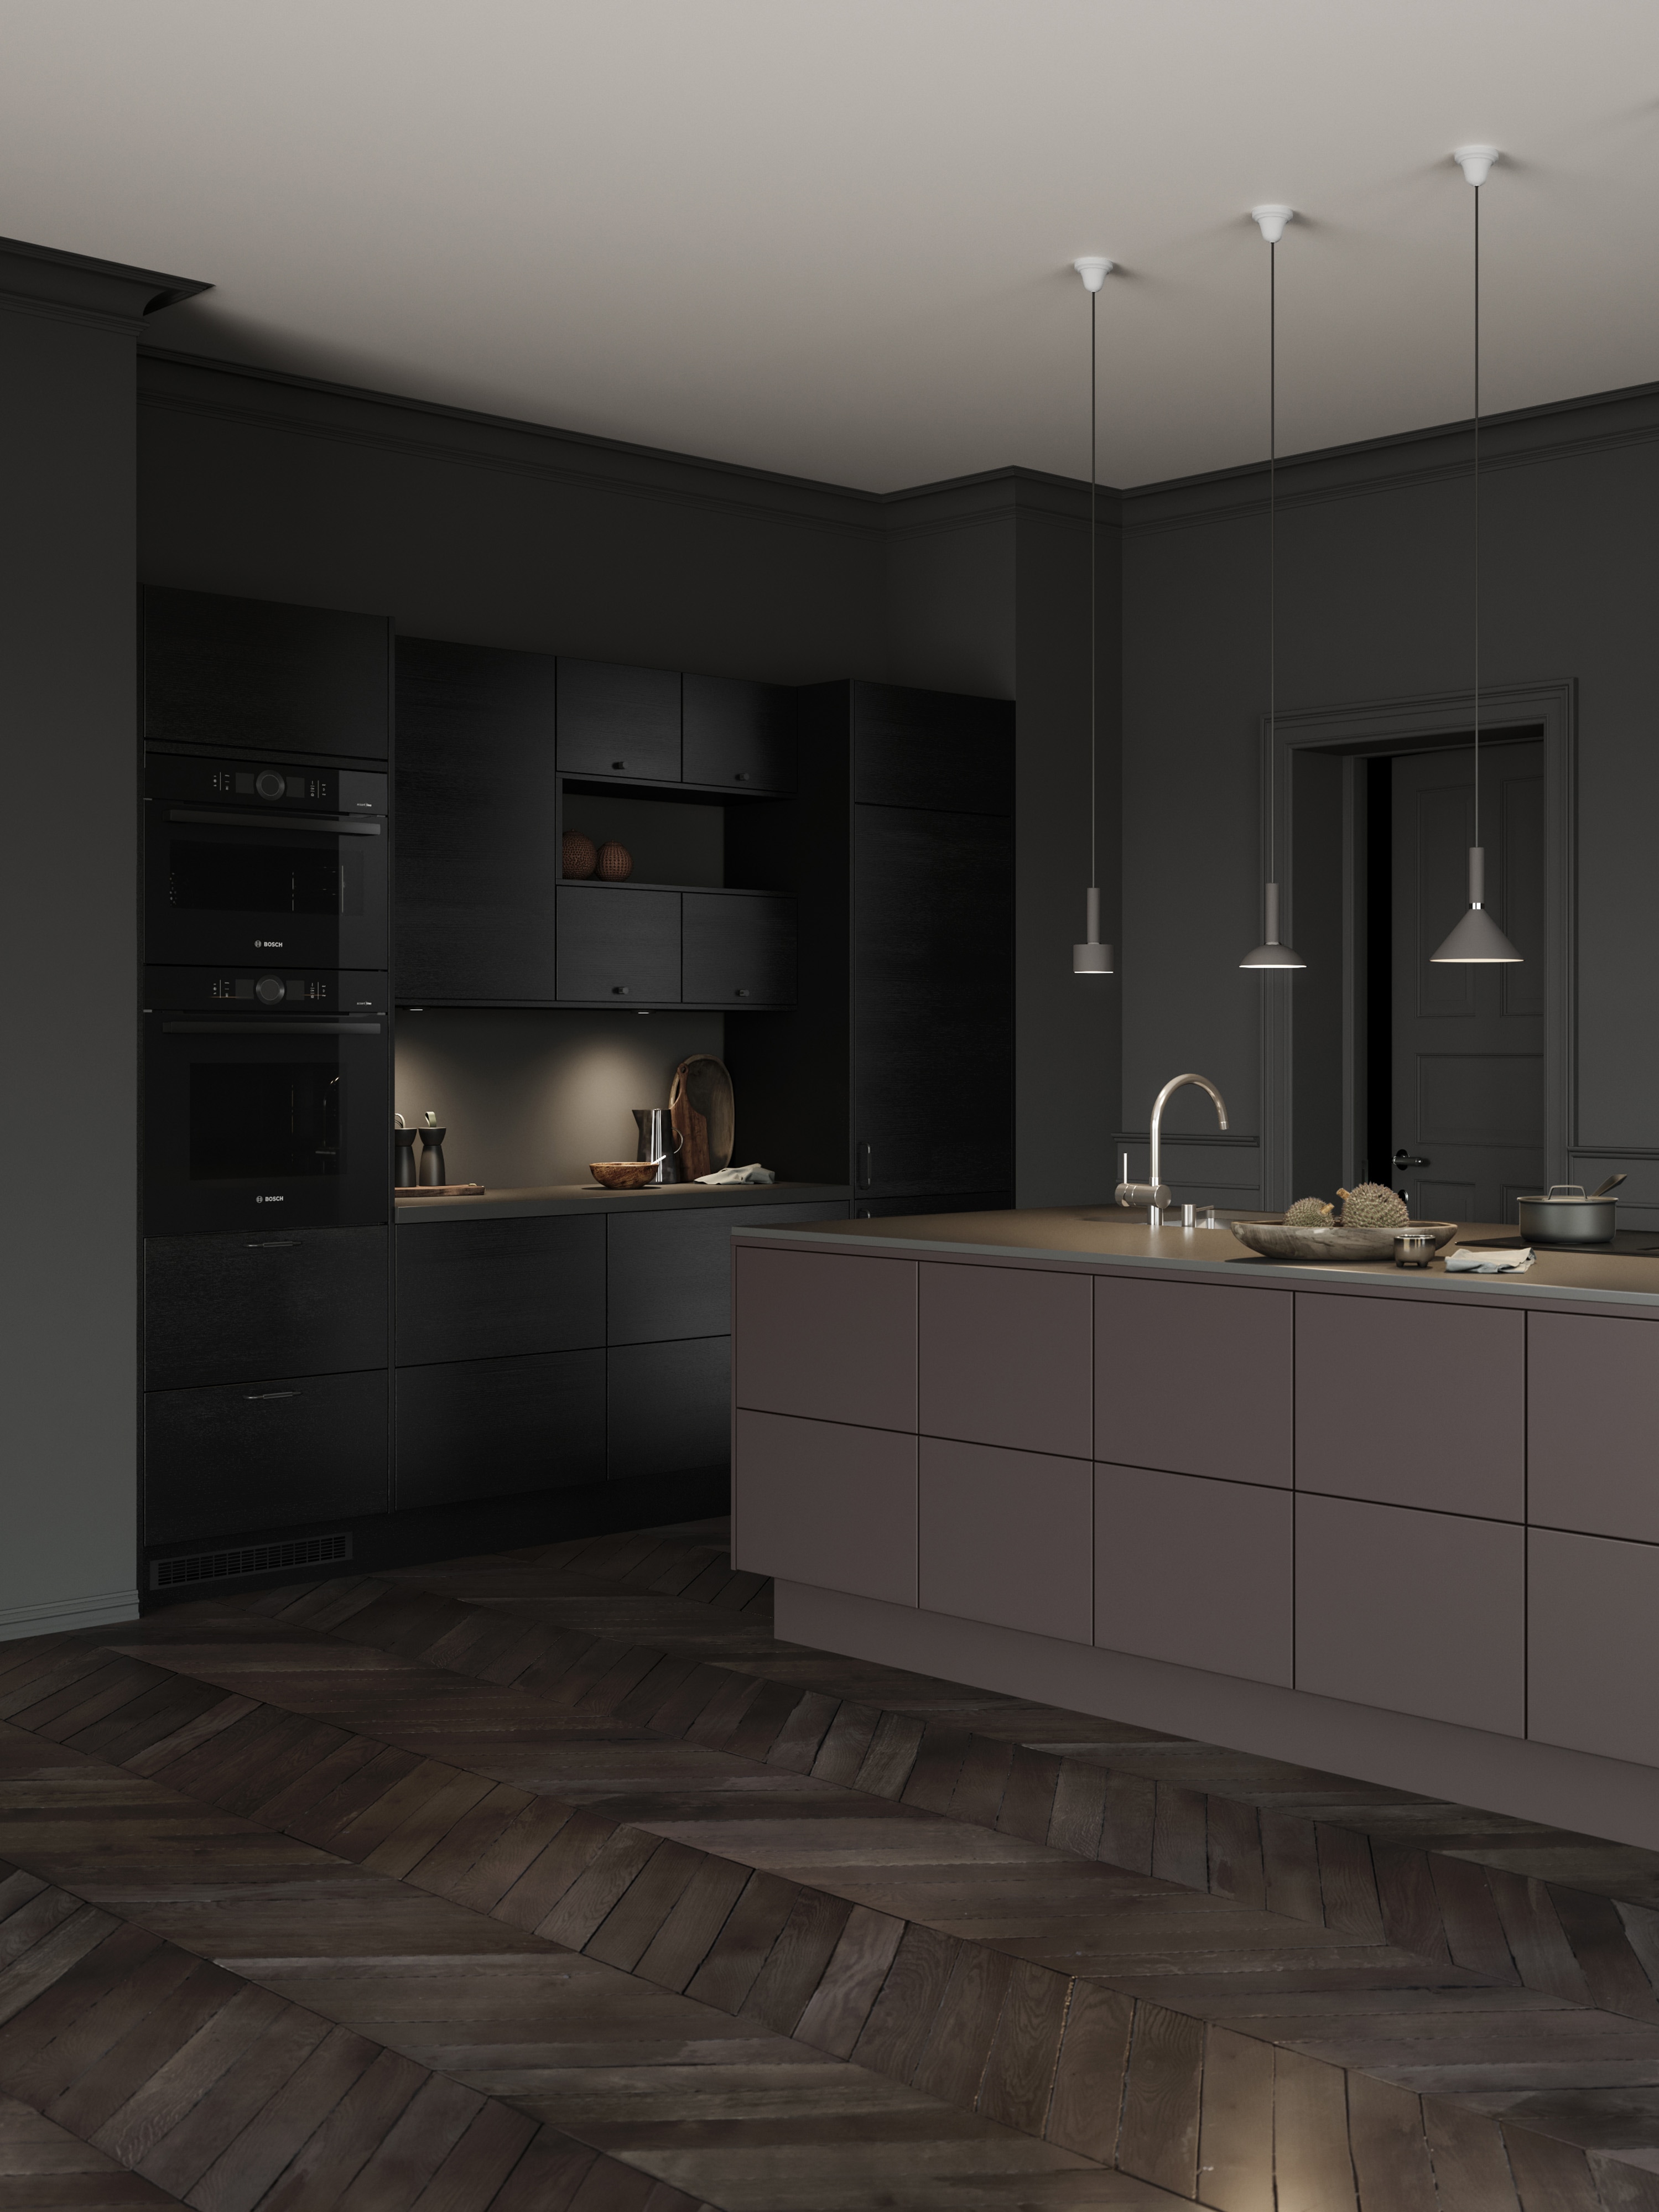 Image collection - Epoq kitchen without handles  